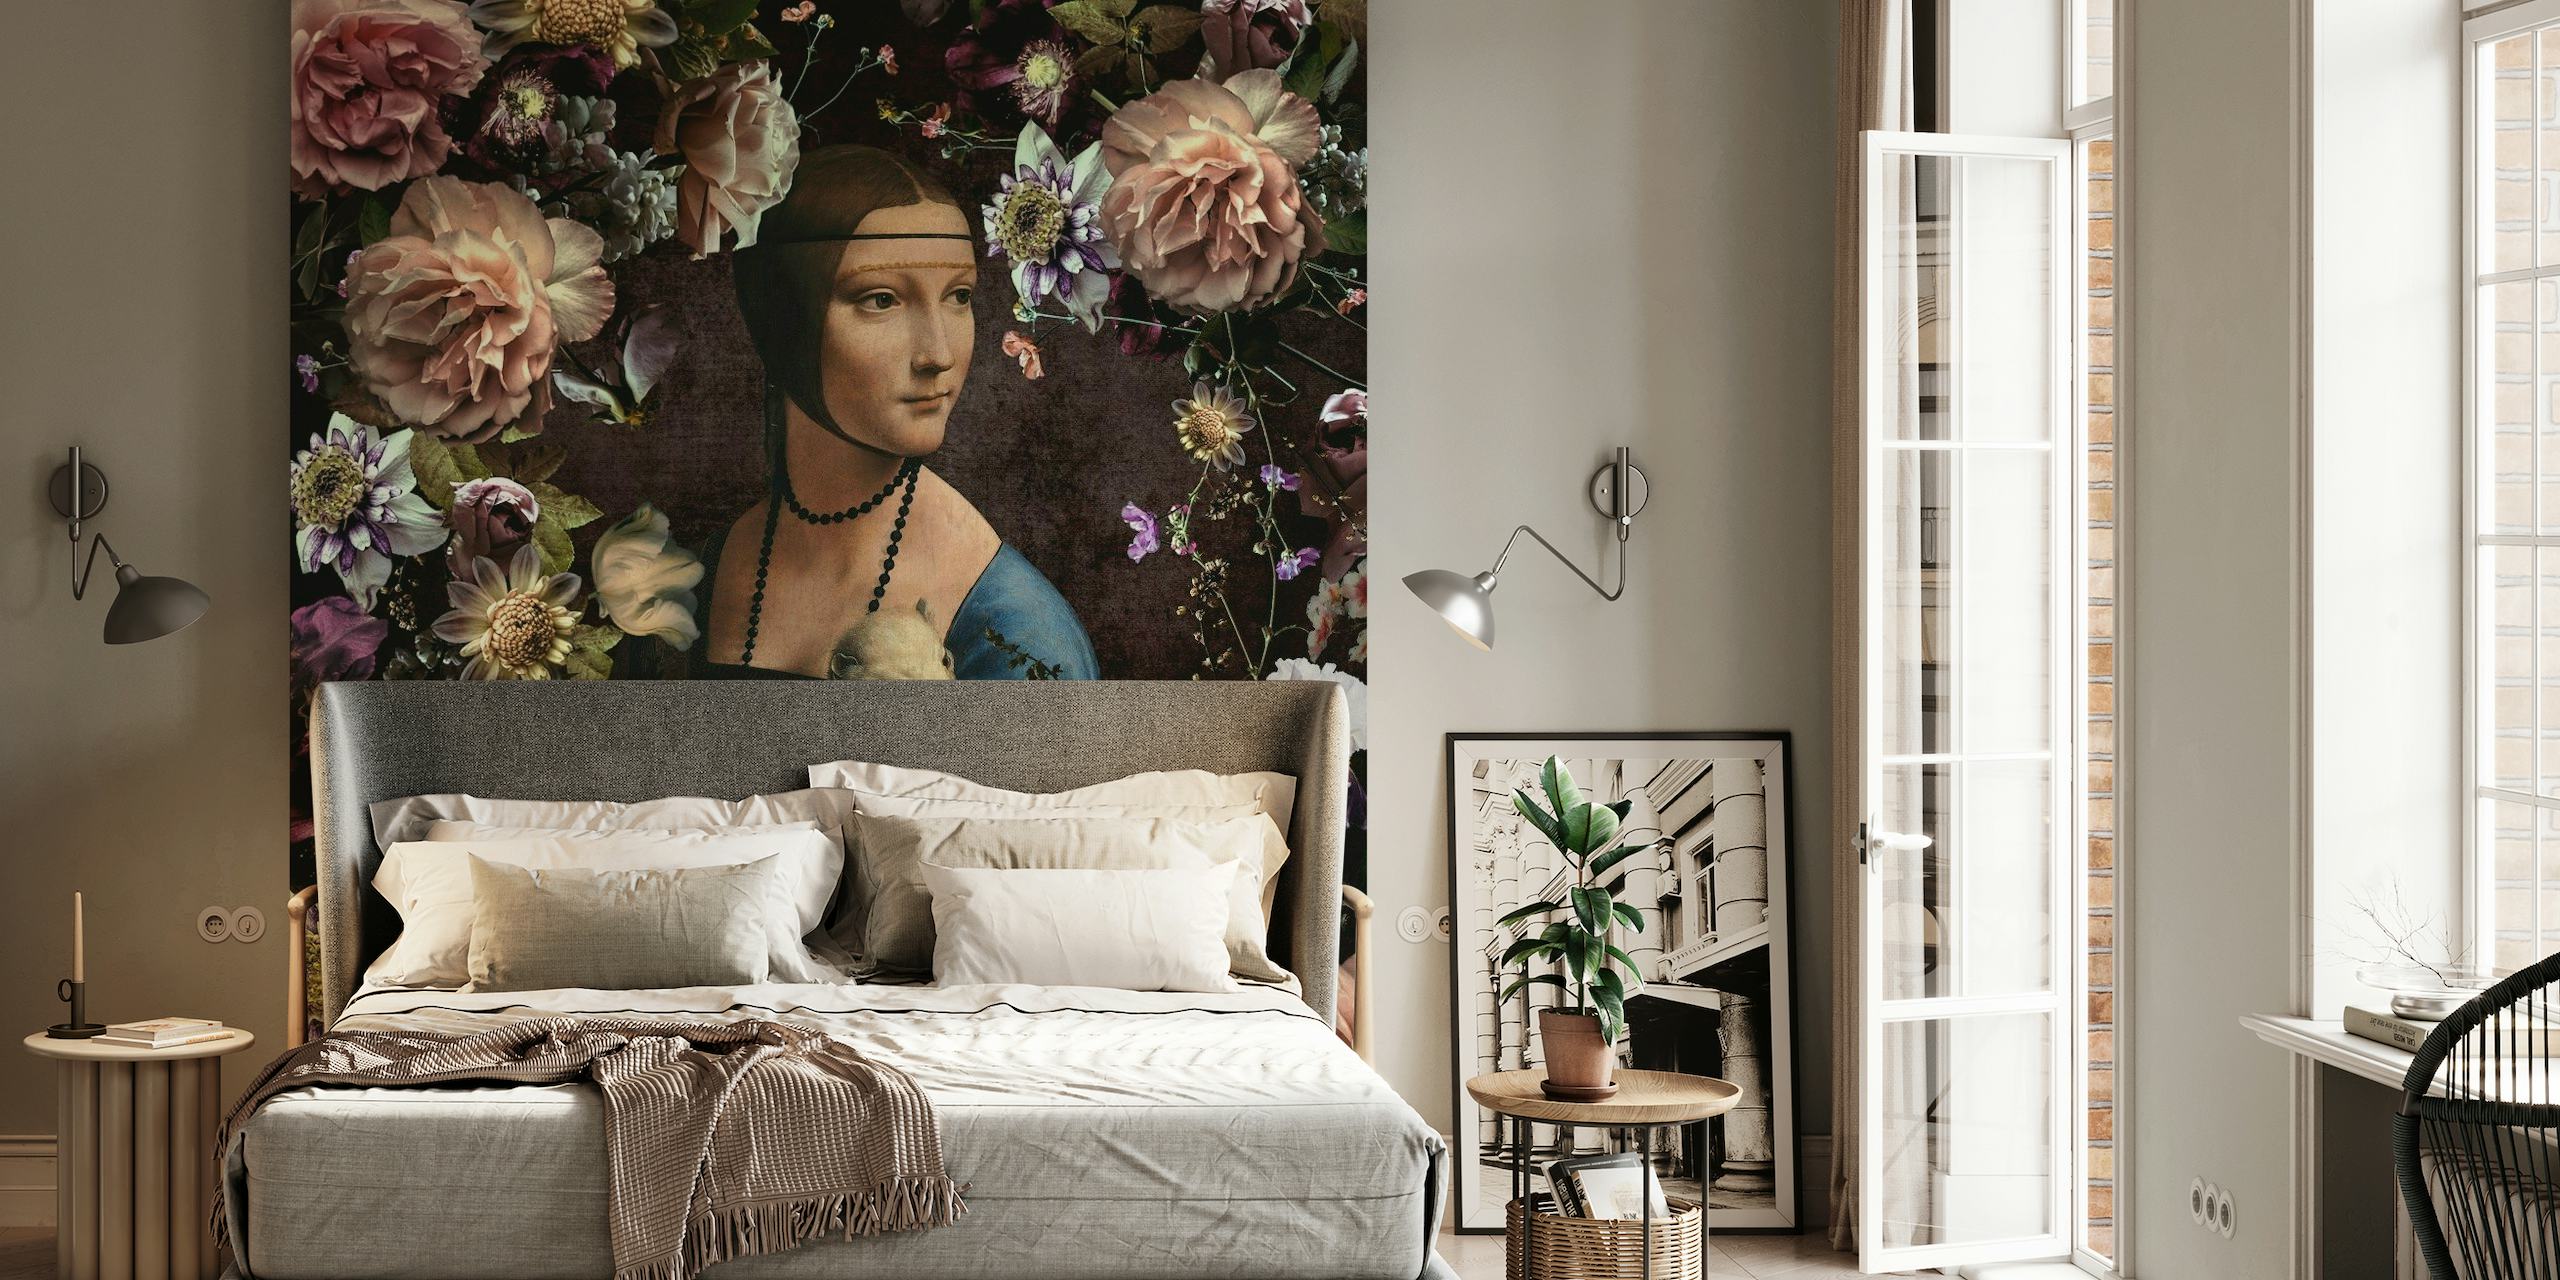 Lady with an Ermine wall mural surrounded by floral tapestry